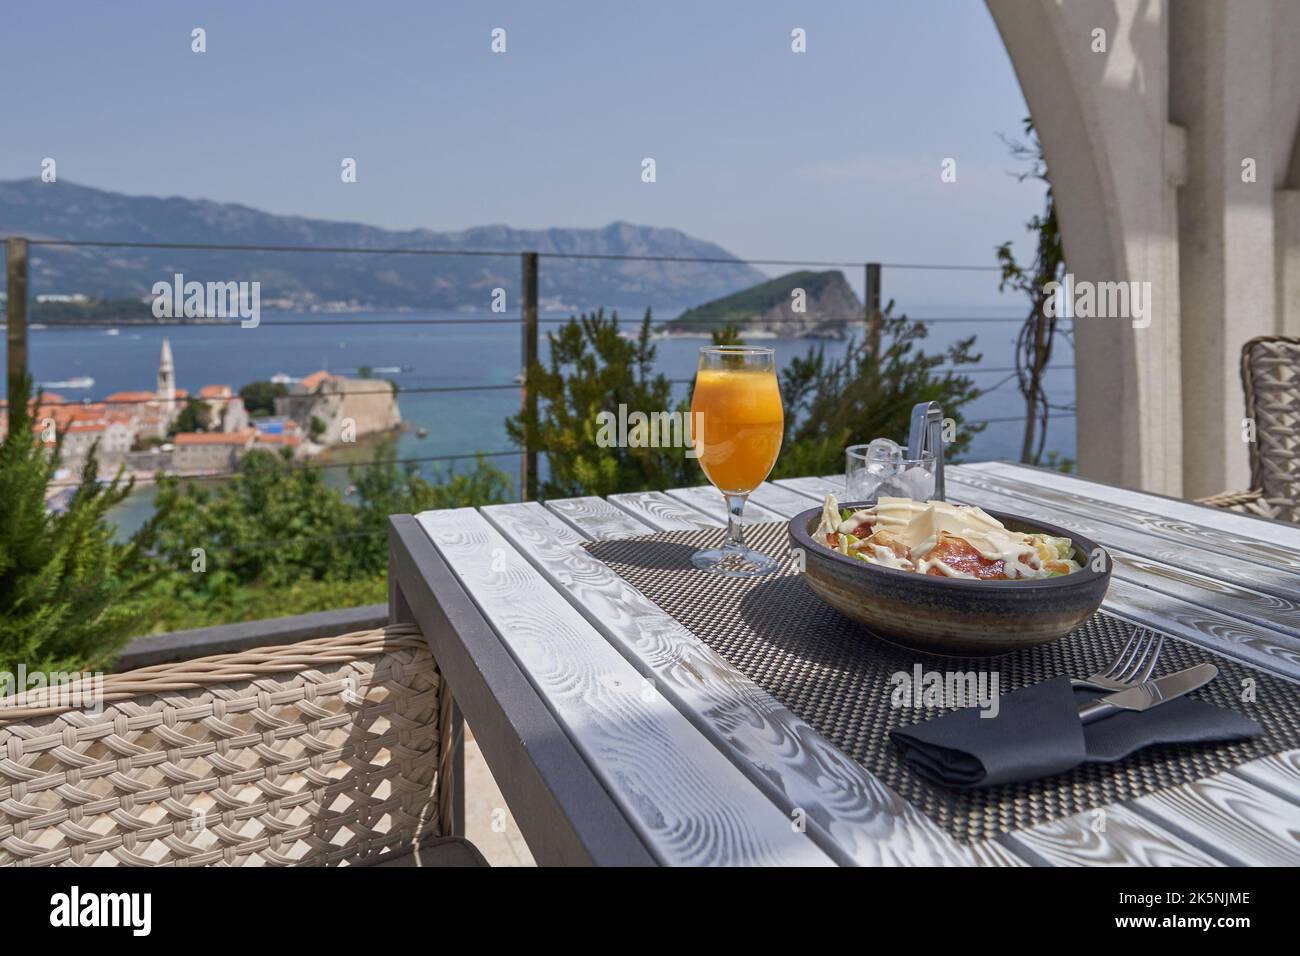 Breakfast and fresh juice on the table in a restaurant with sea view. Stock Photo